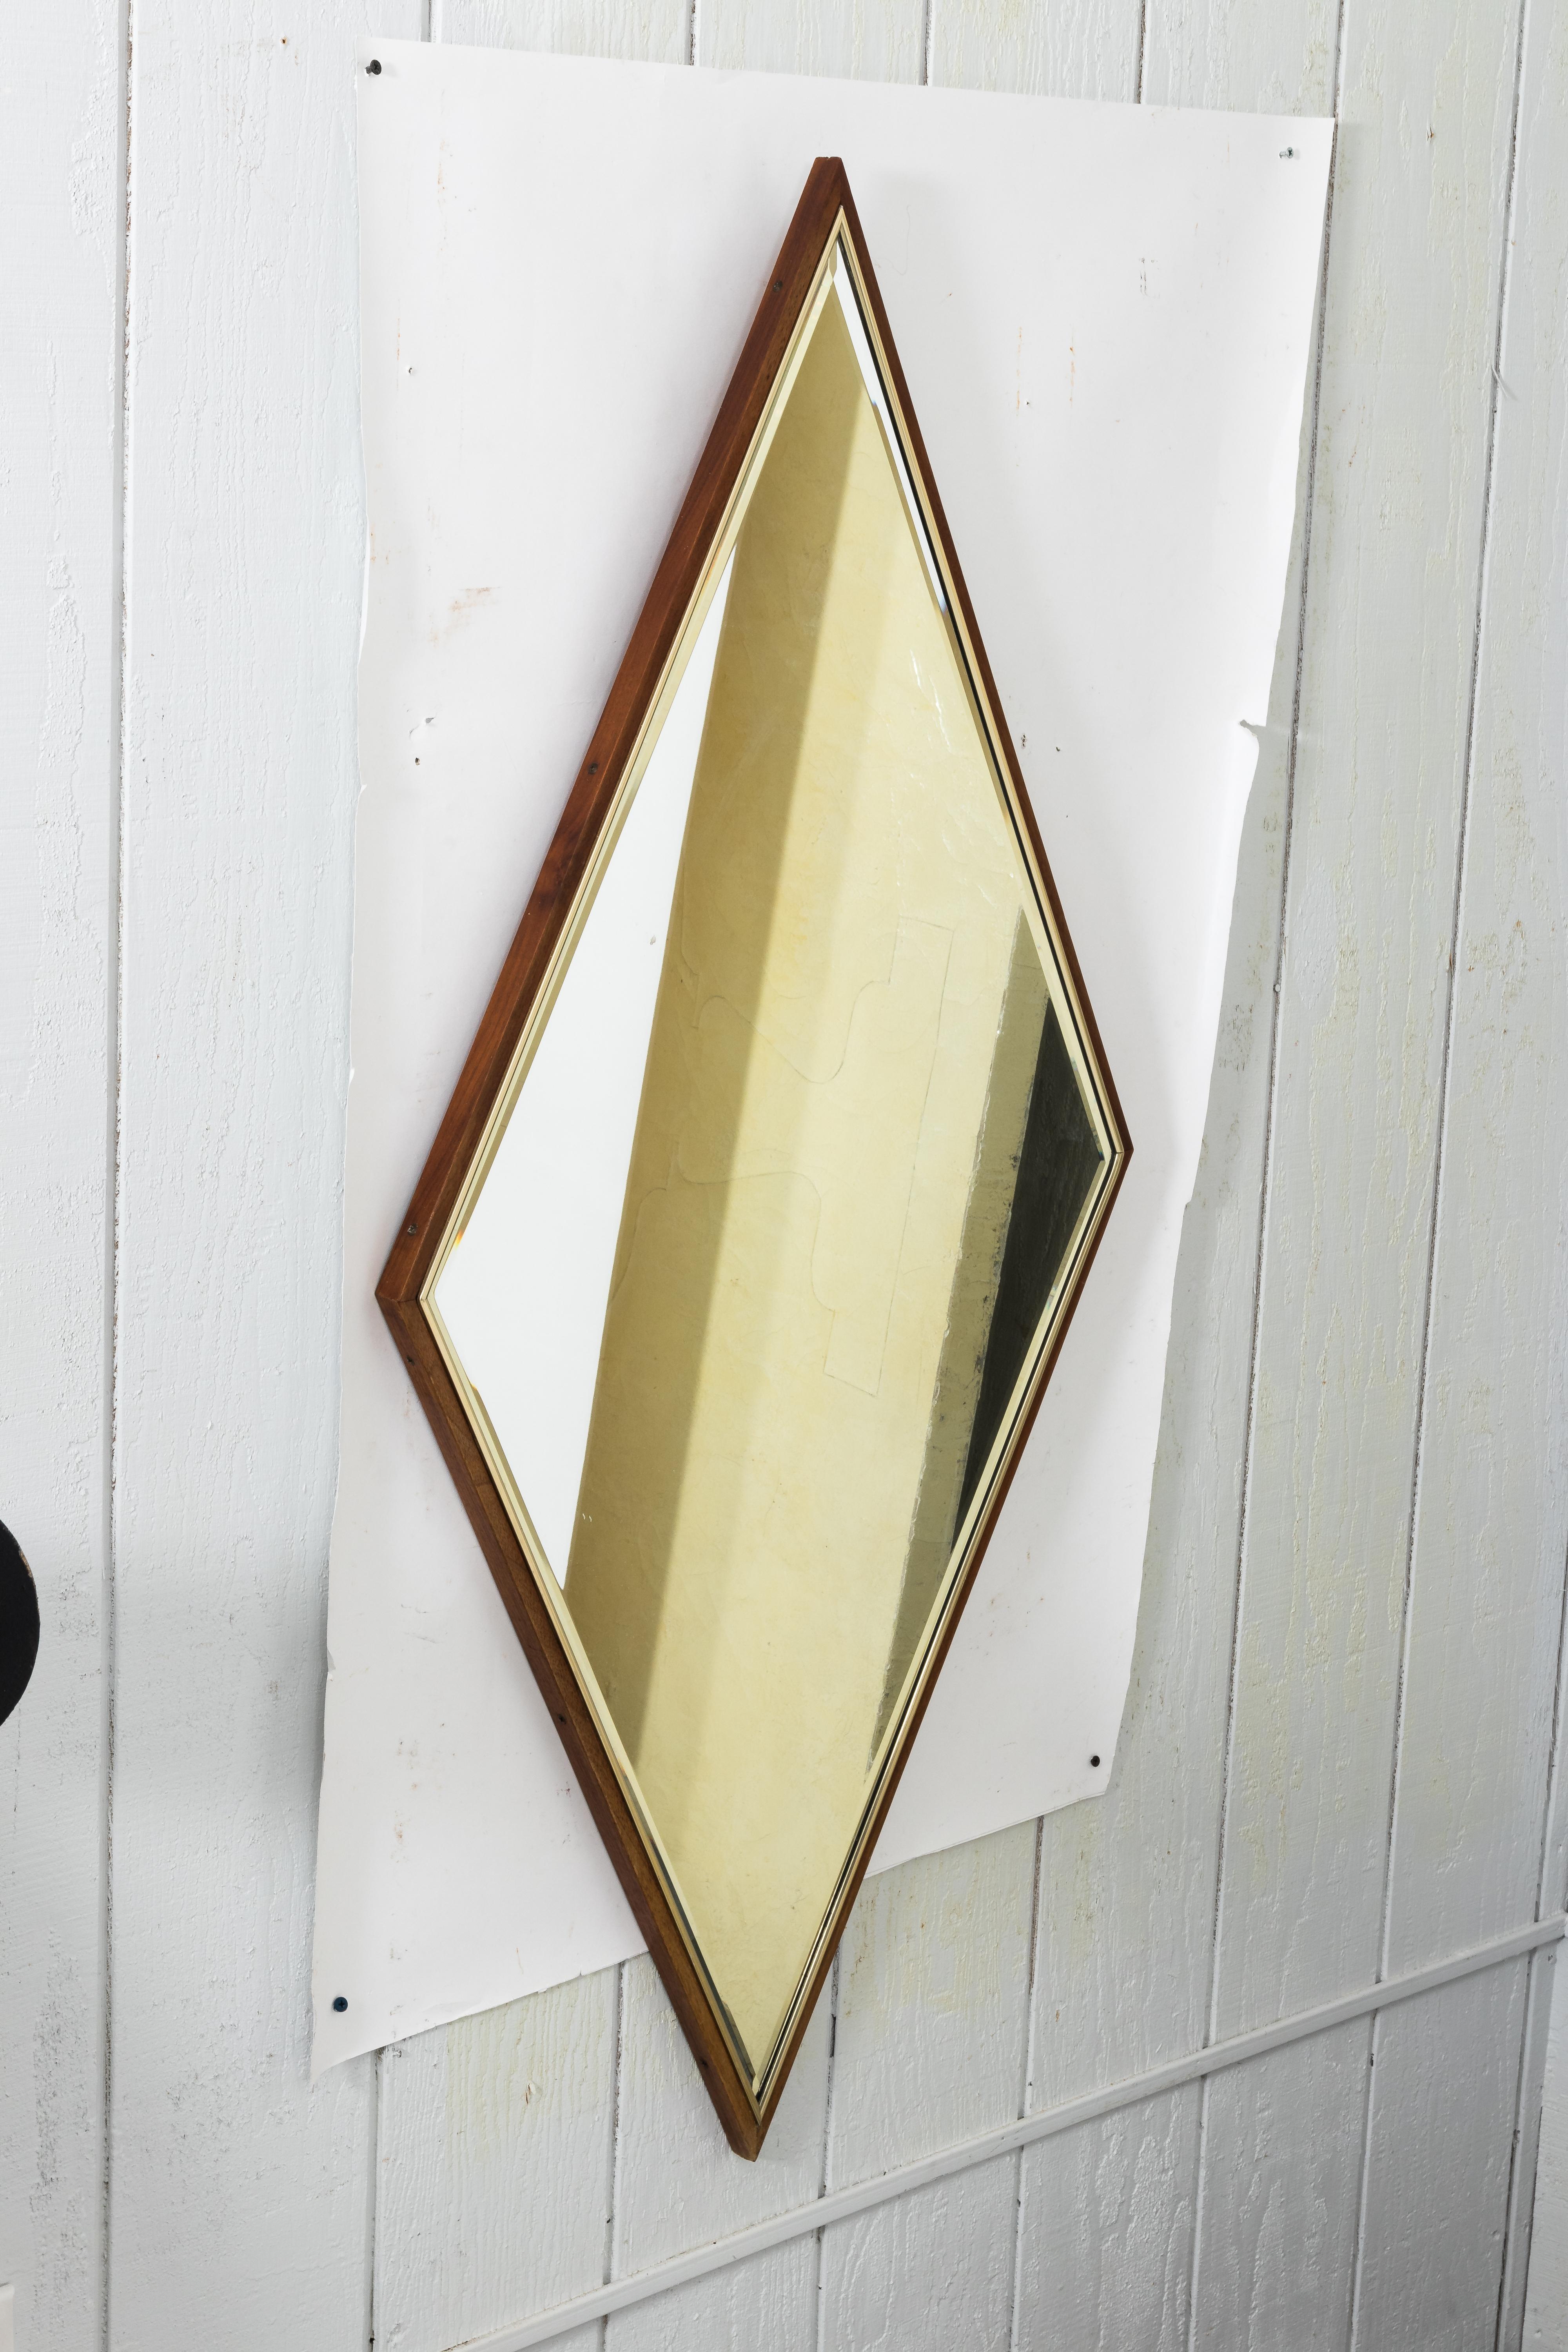 Walnut and brass diamond shaped mirror with bevelled edges, circa 1960s.